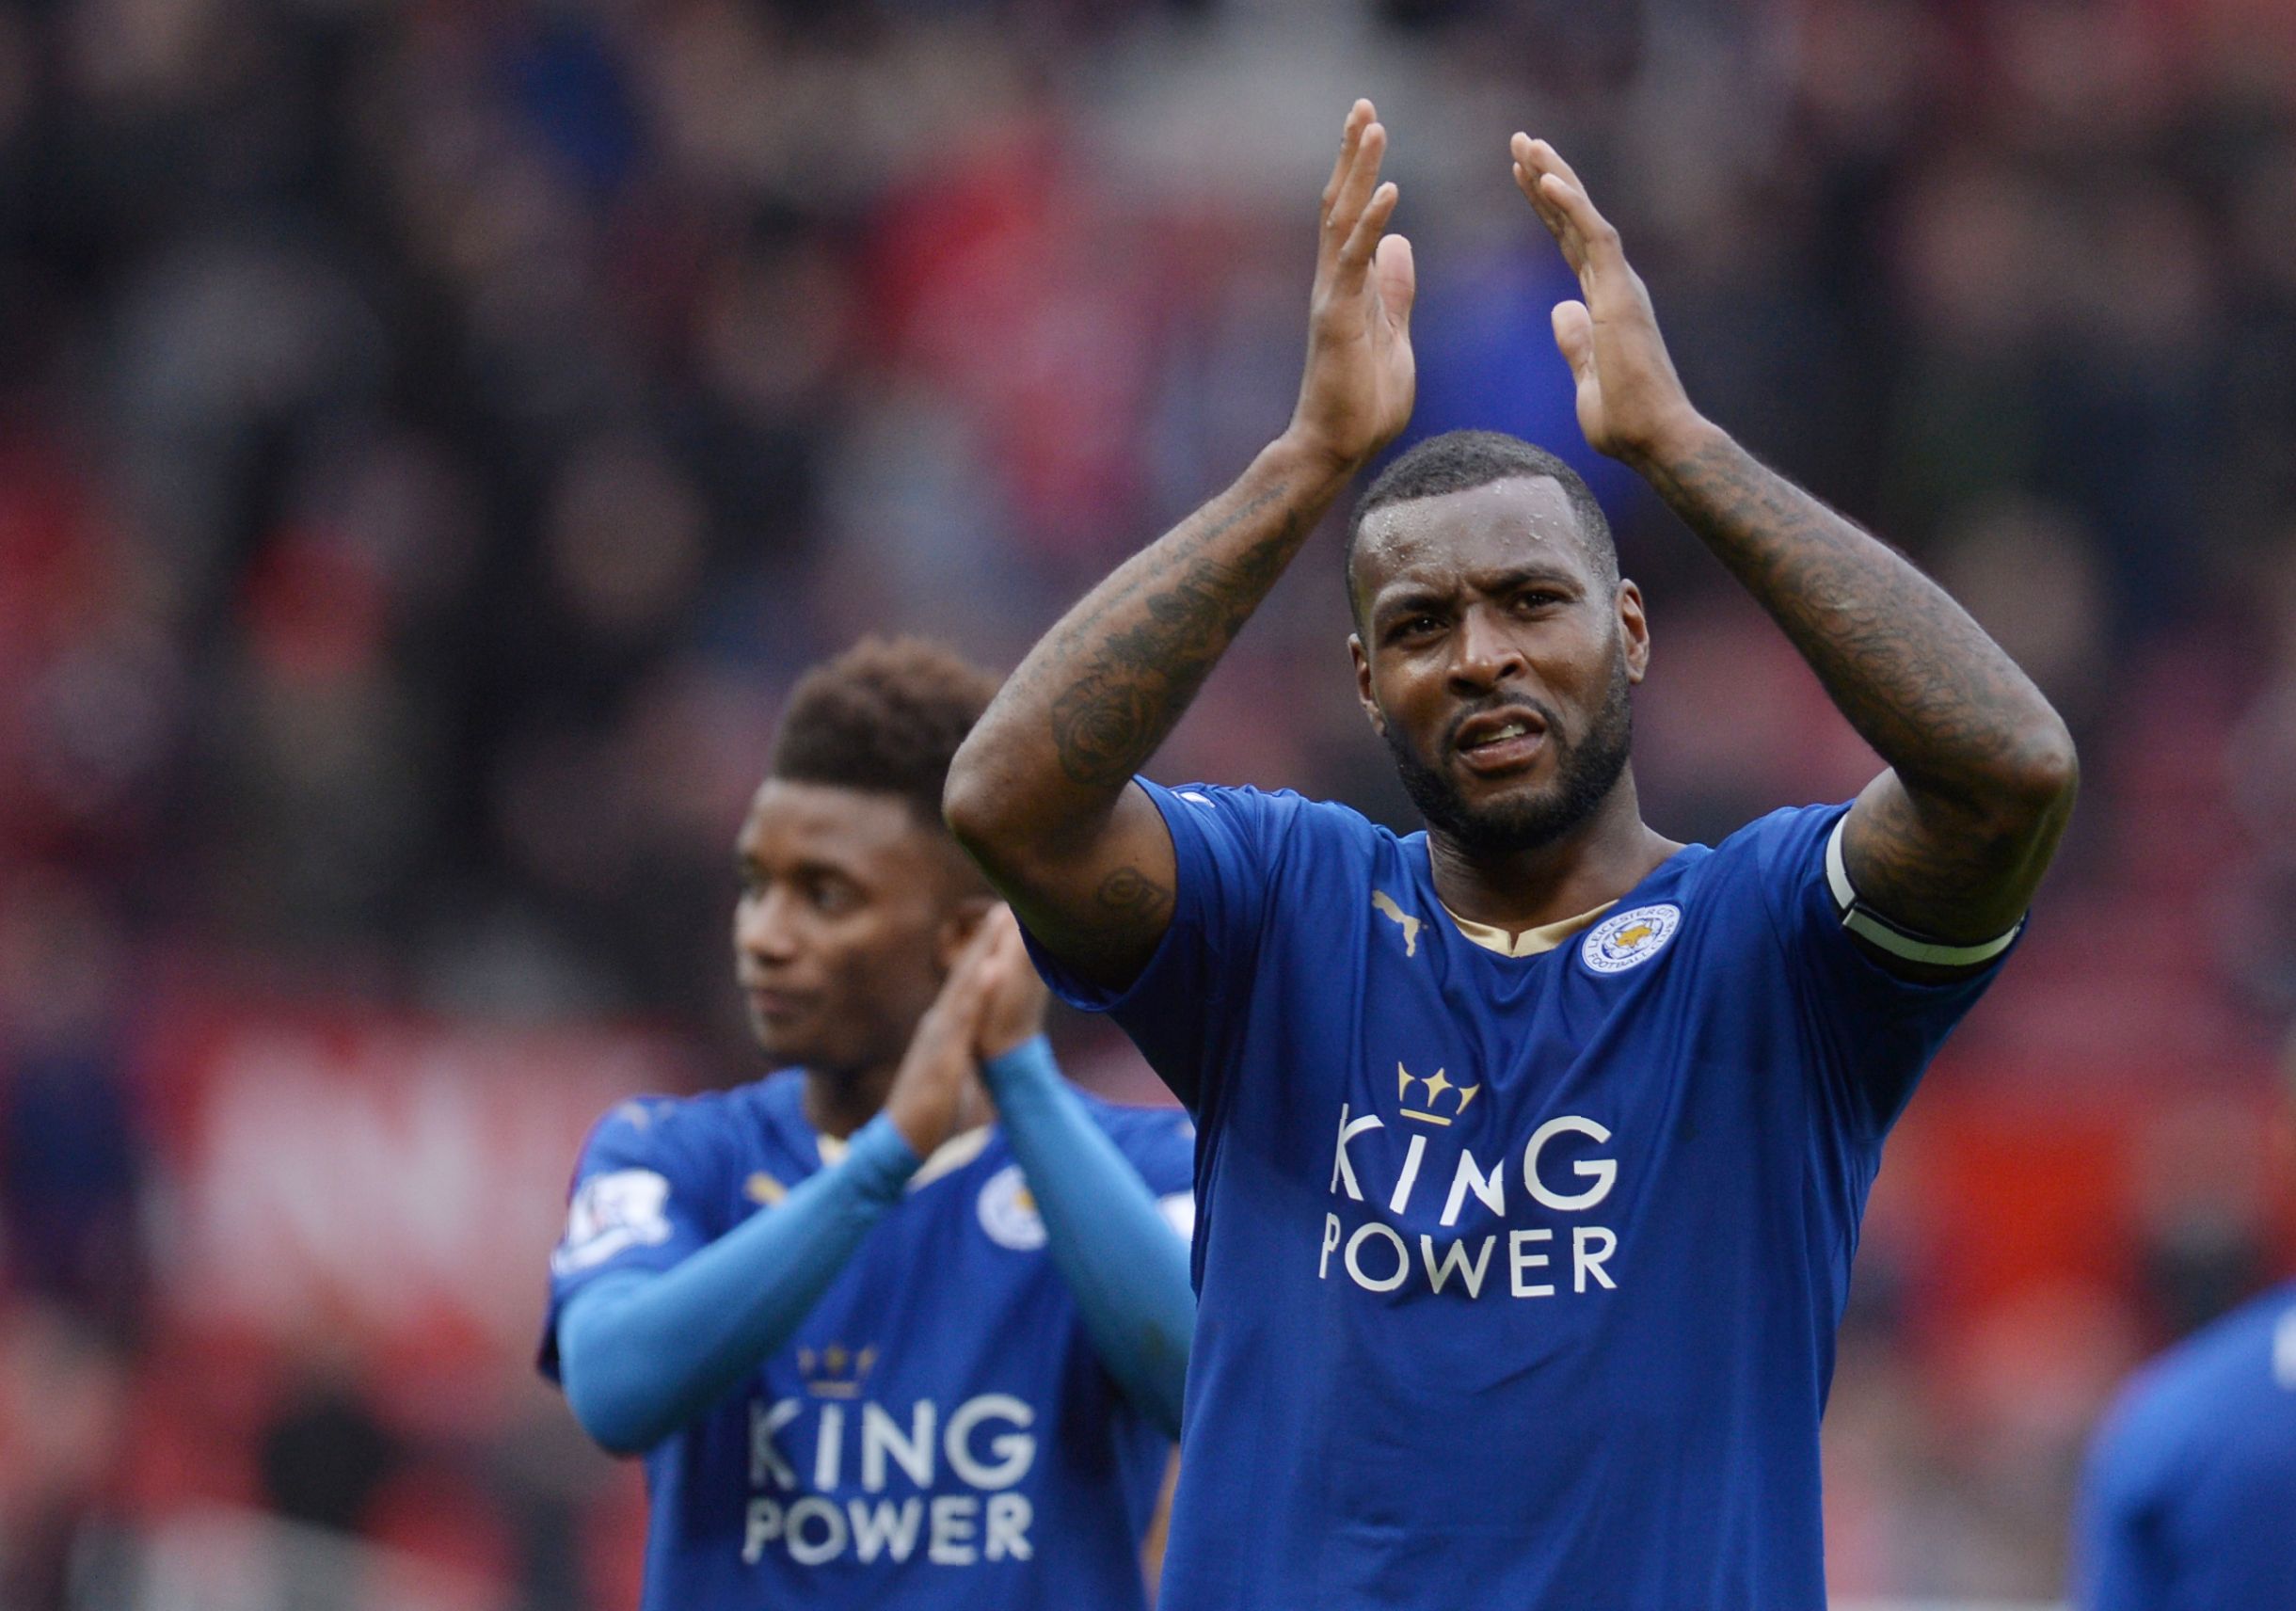 Football: Leicester draw at Man United to move to brink of title